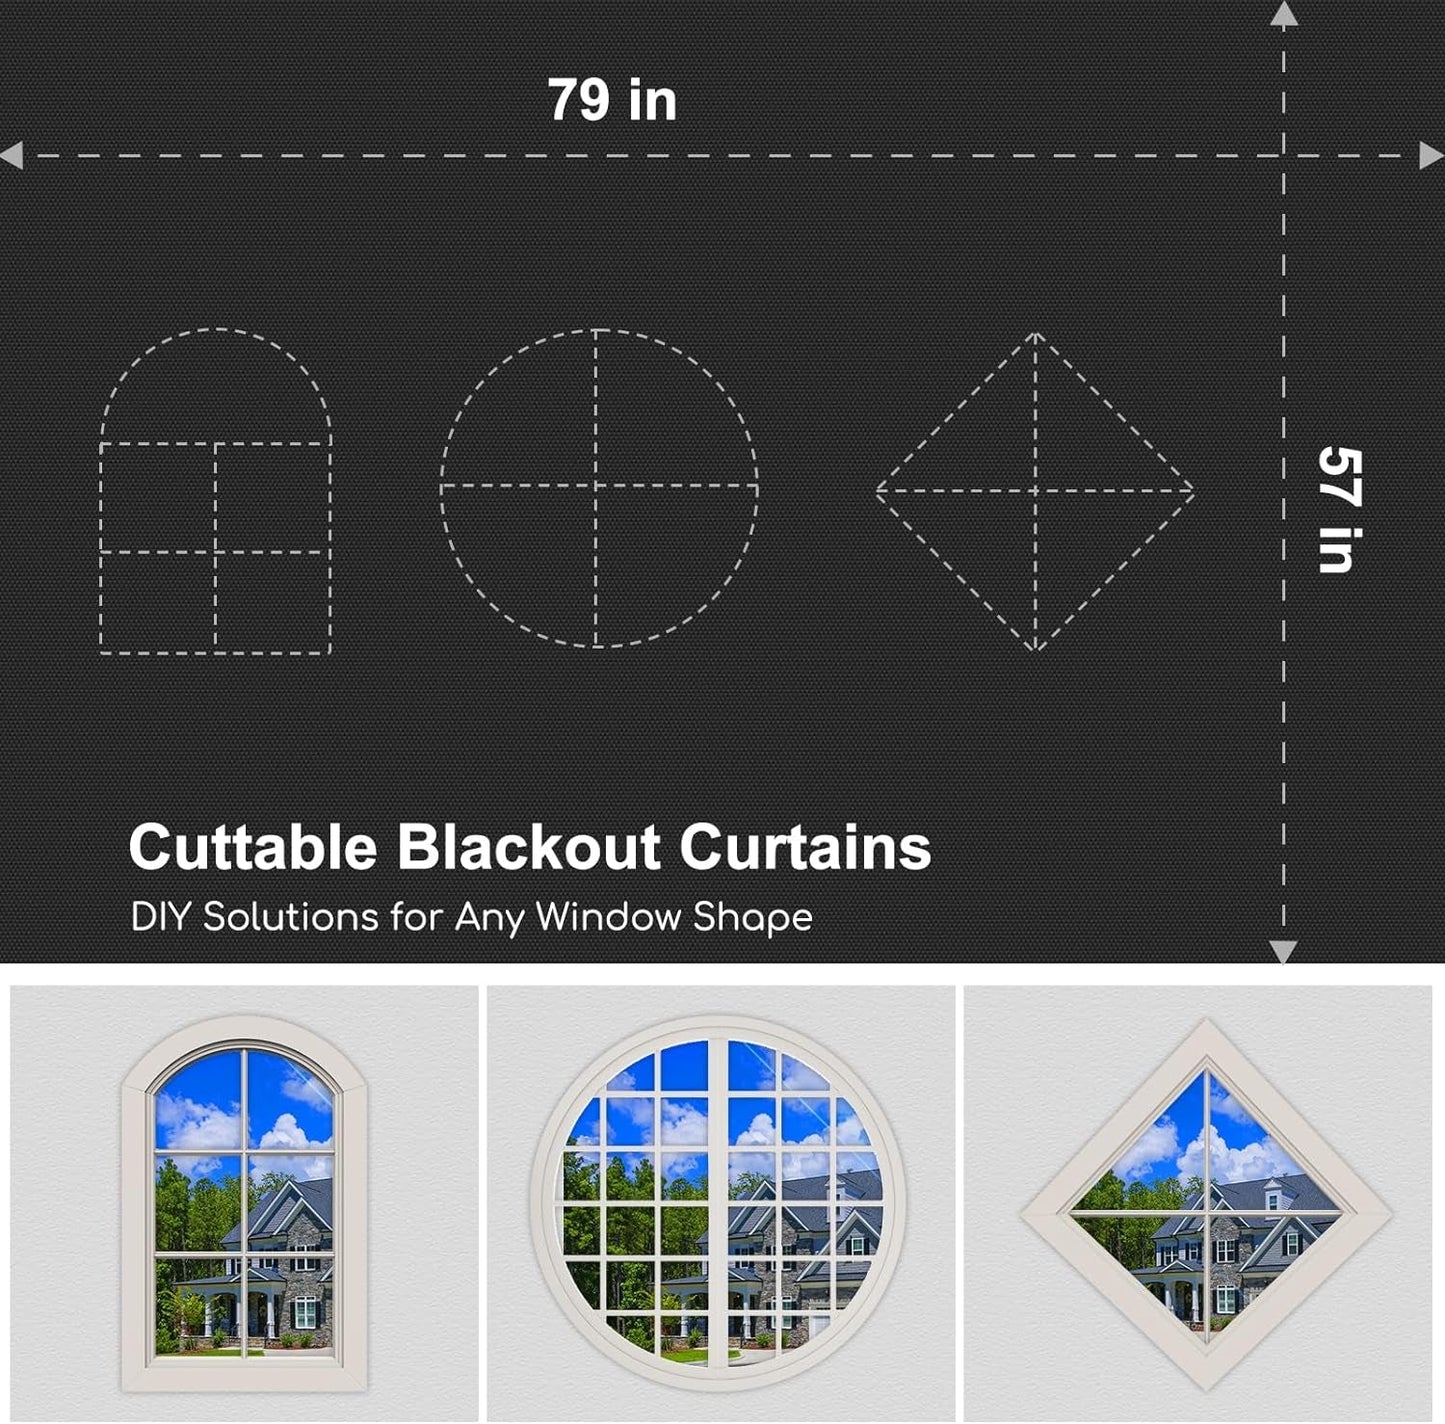 Blackout Curtains for Bedroom - 79" X 57" Portable Blackout Blinds Curtain for Any Windows -100% Blackout Shades Window Film -Temporary Blackout Shades for Baby Nursery,Dorm Room,Travel or Office Use